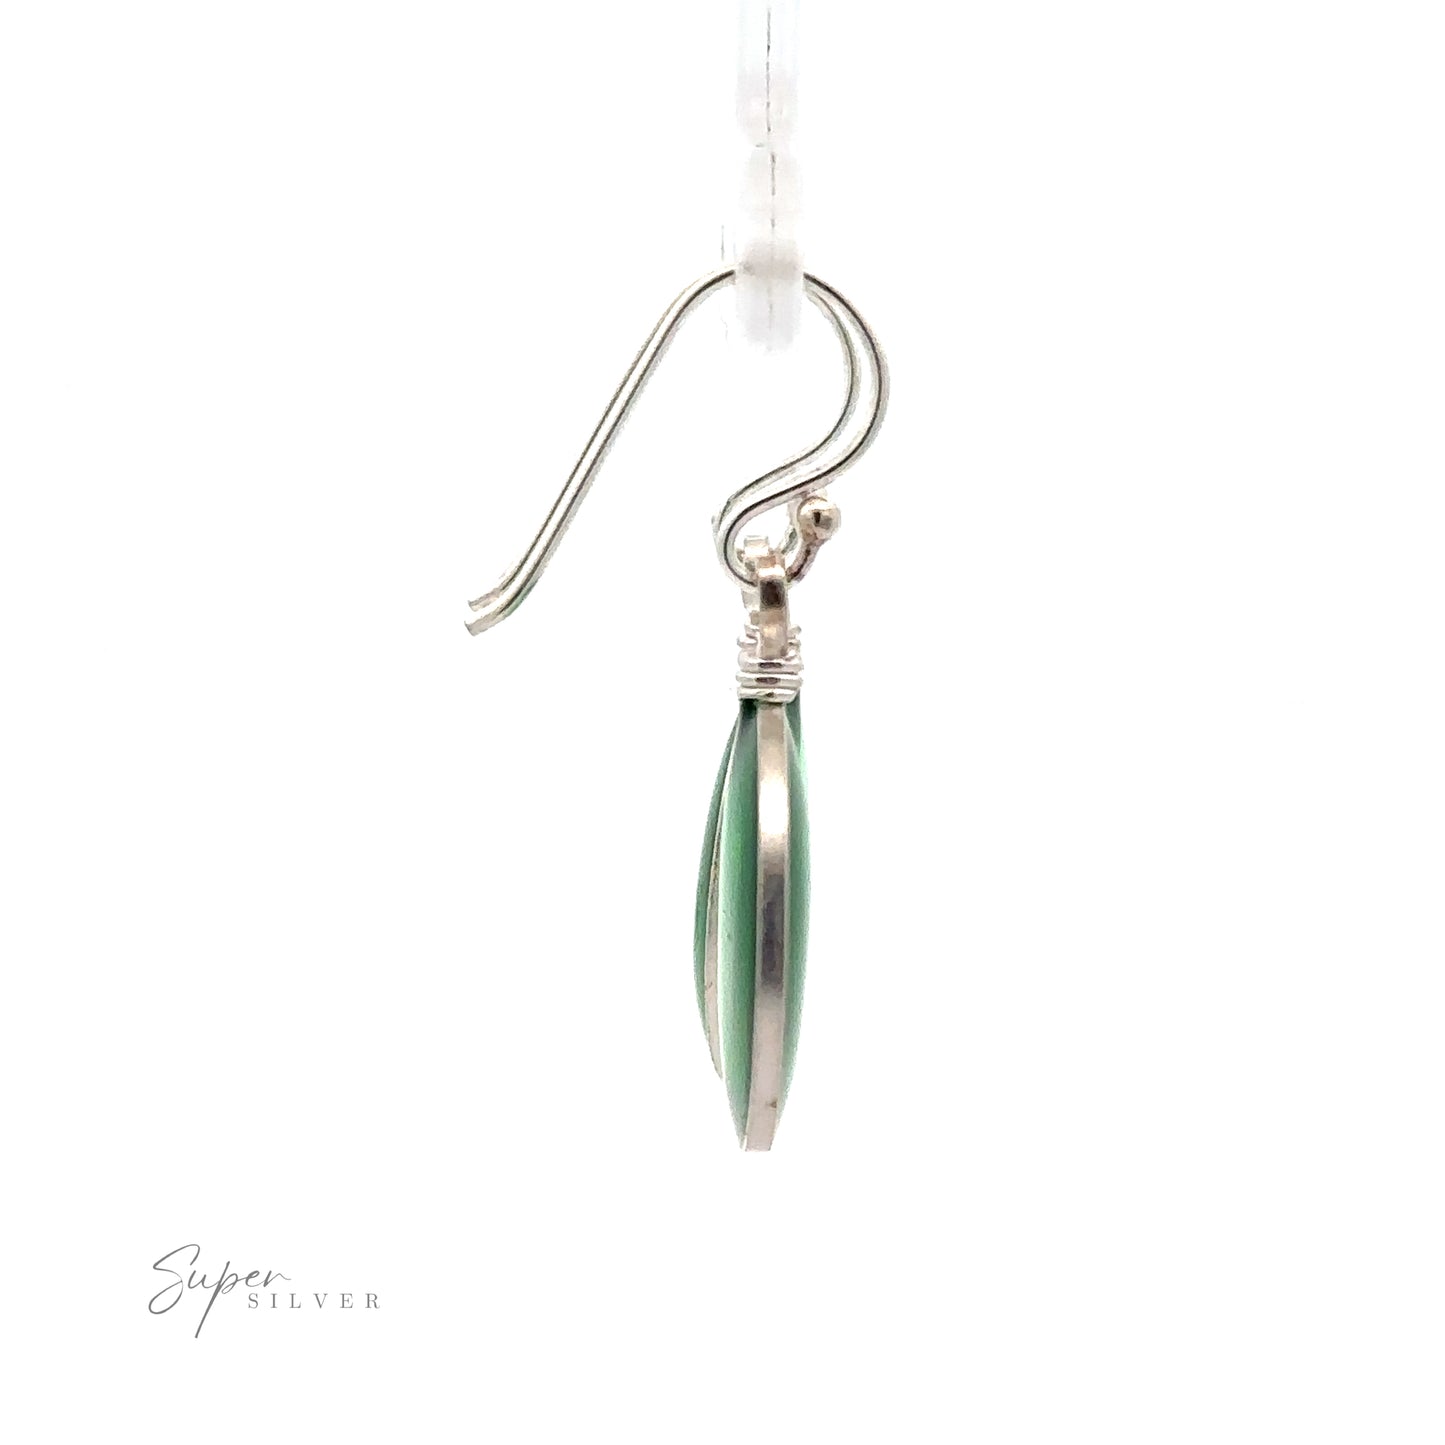 
                  
                    A single Round Glass Earring, attached to a hook, displayed against a white background. The text "Super Silver" is seen in the bottom left corner.

                  
                